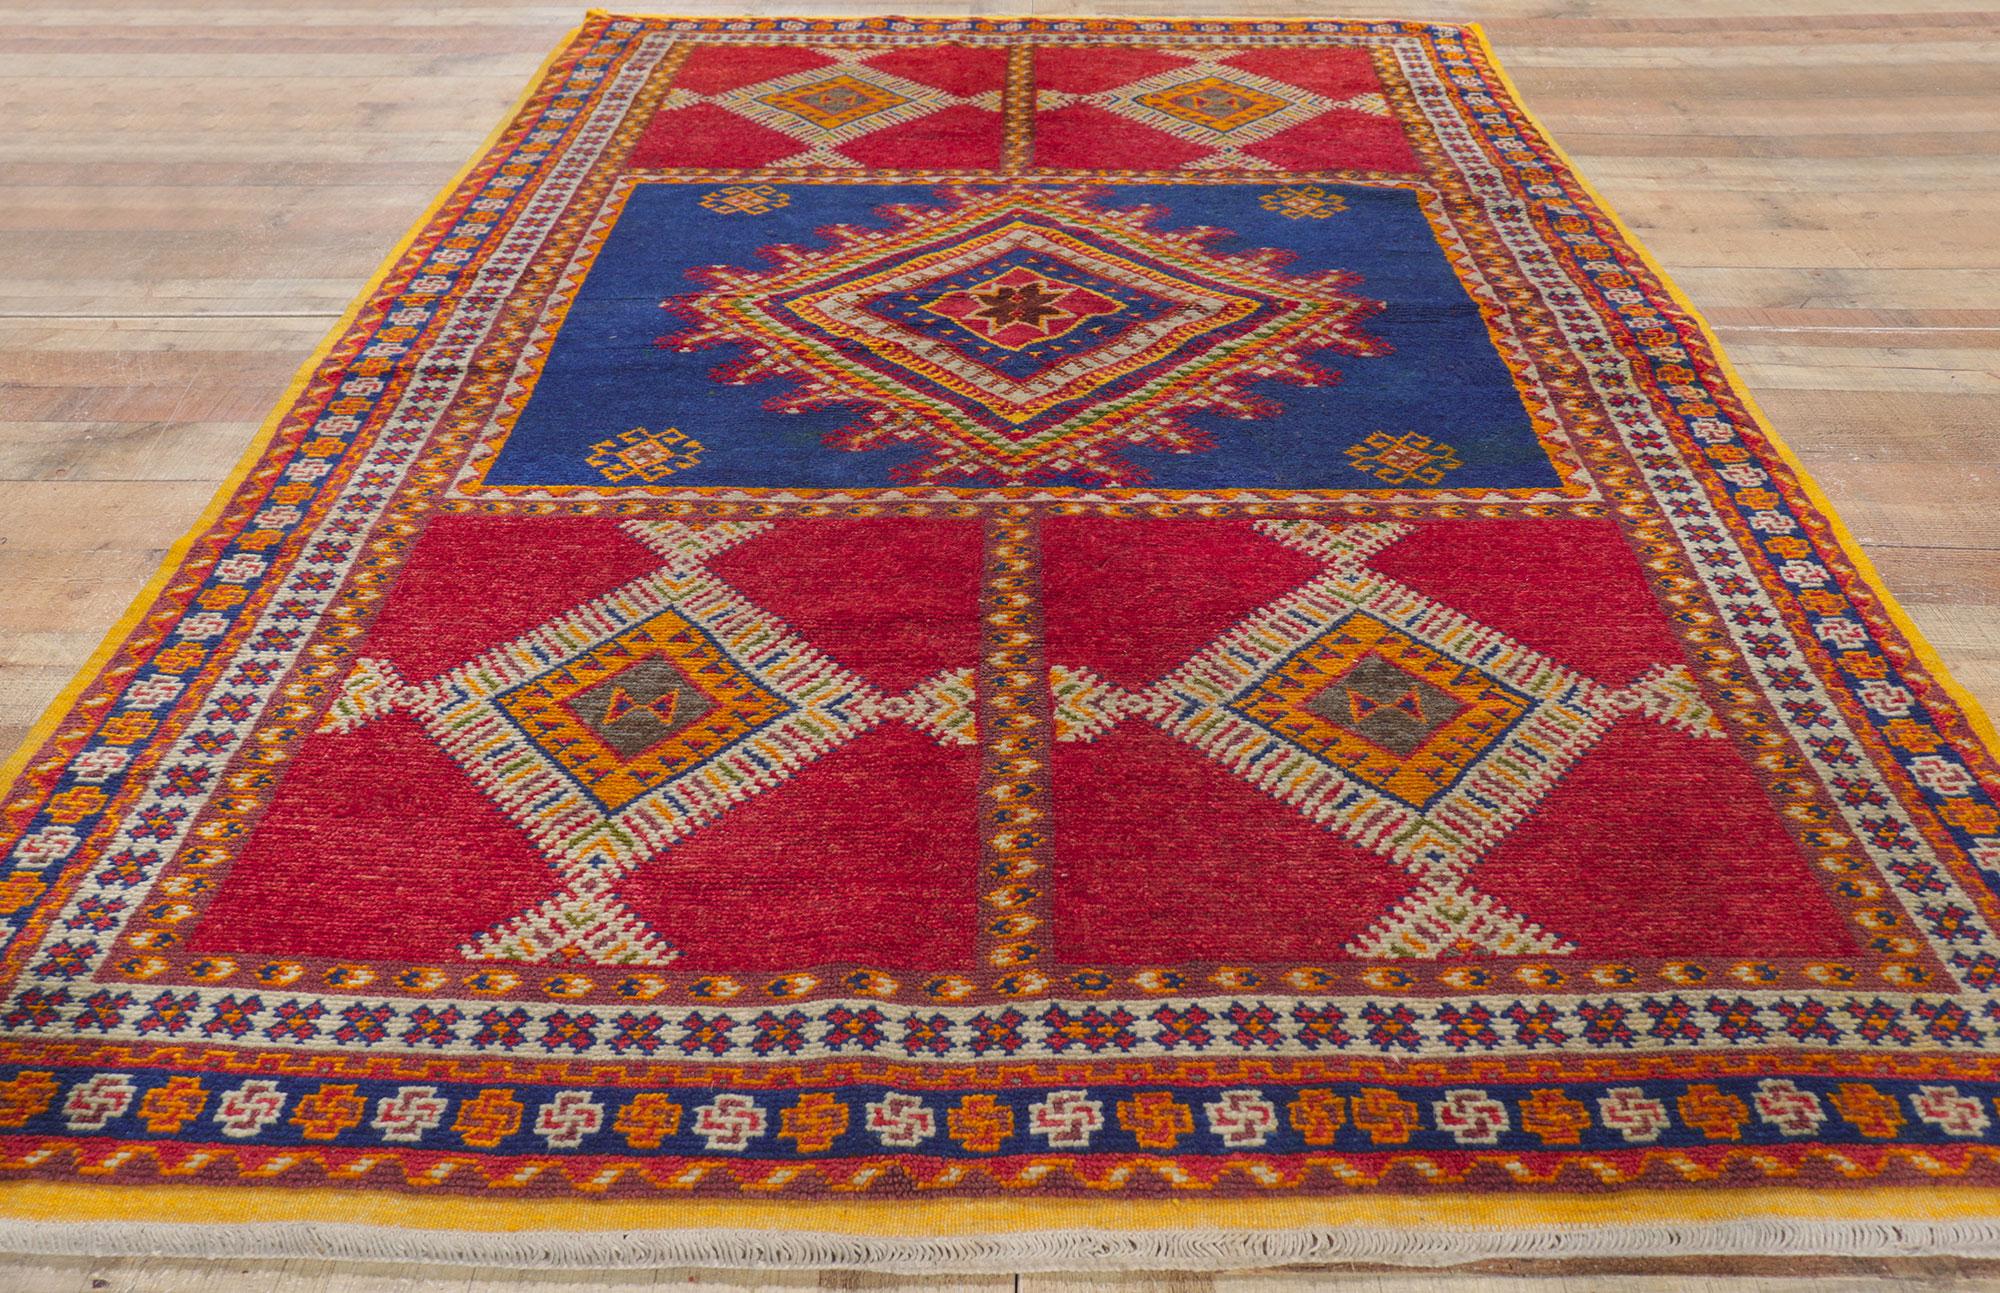 Vintage Taznakht Moroccan Rug by Berber Tribes of Morocco 1